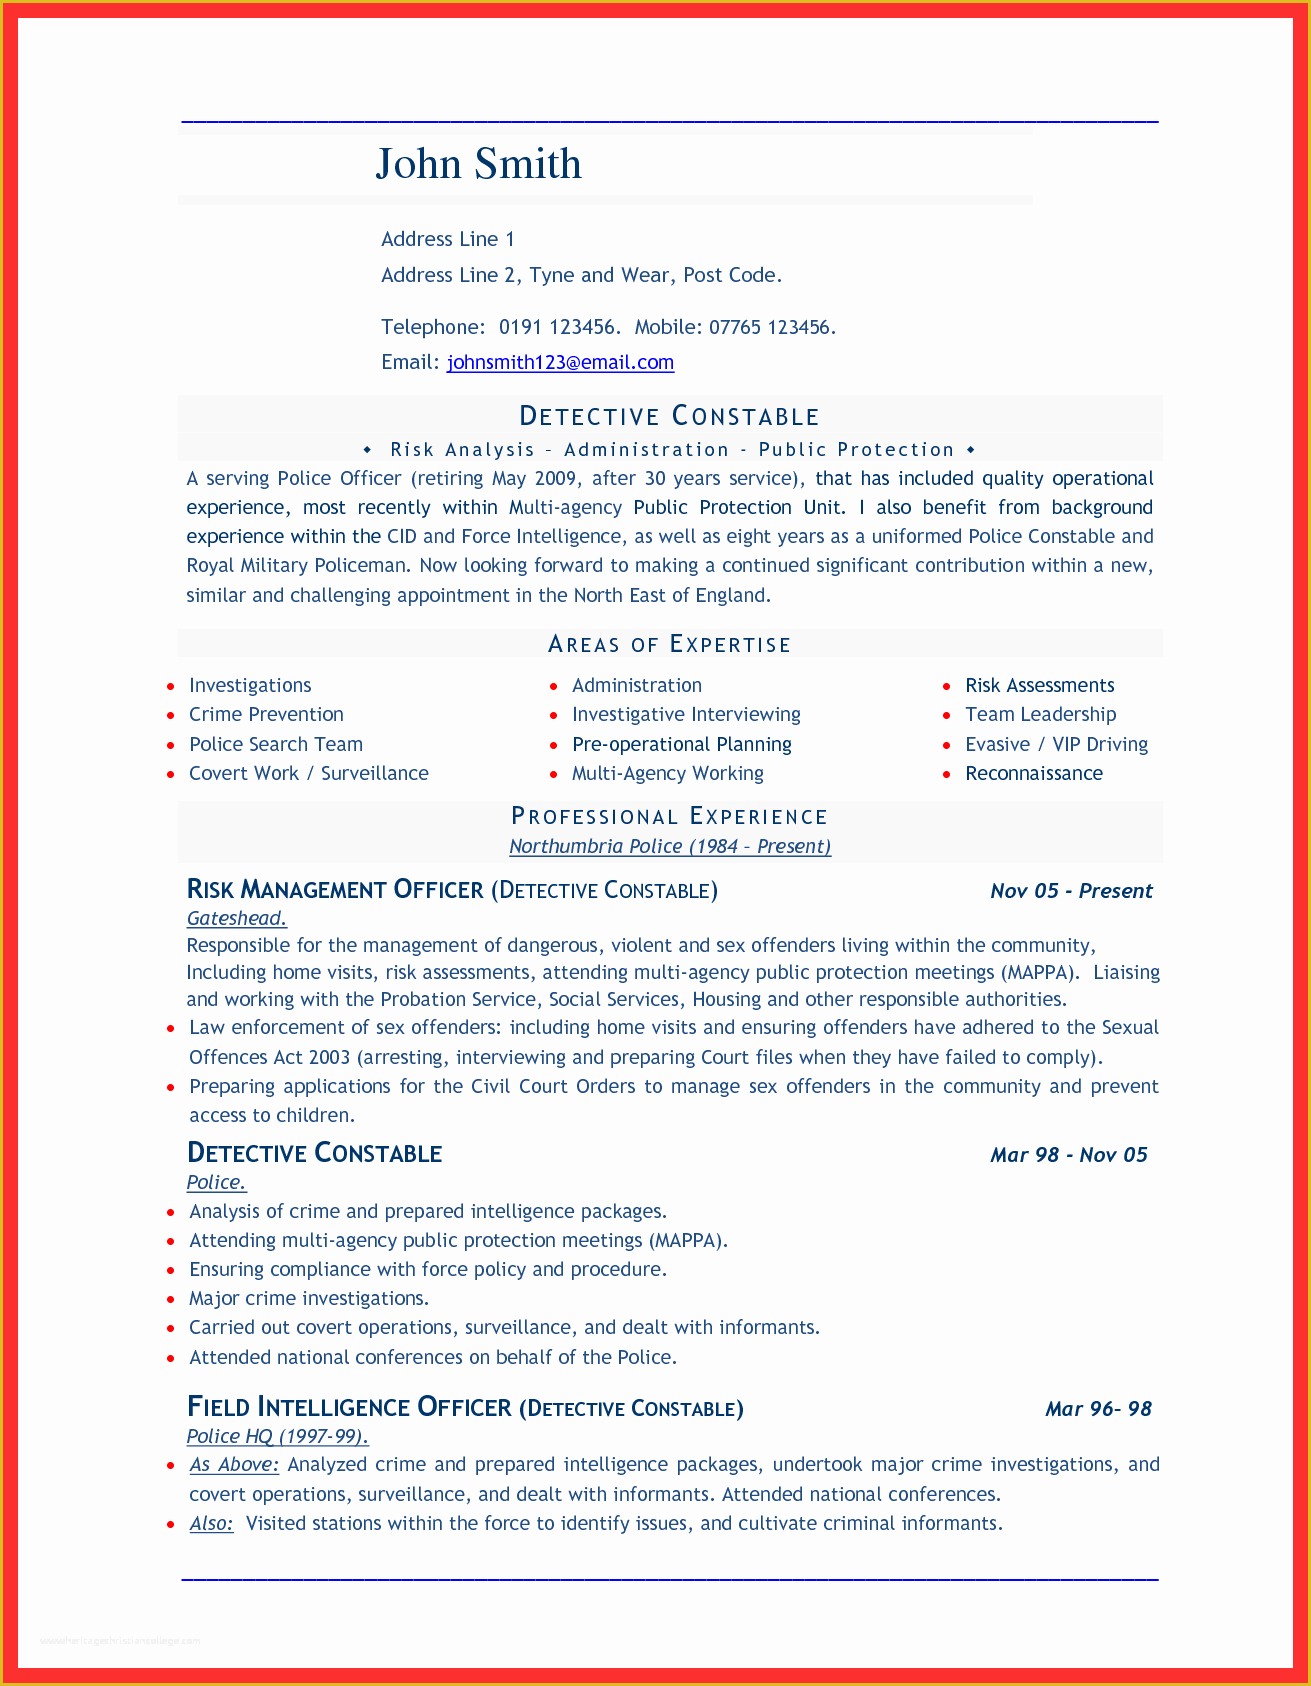 cv-templates-free-download-word-document-of-tables-cv-template-free-ms